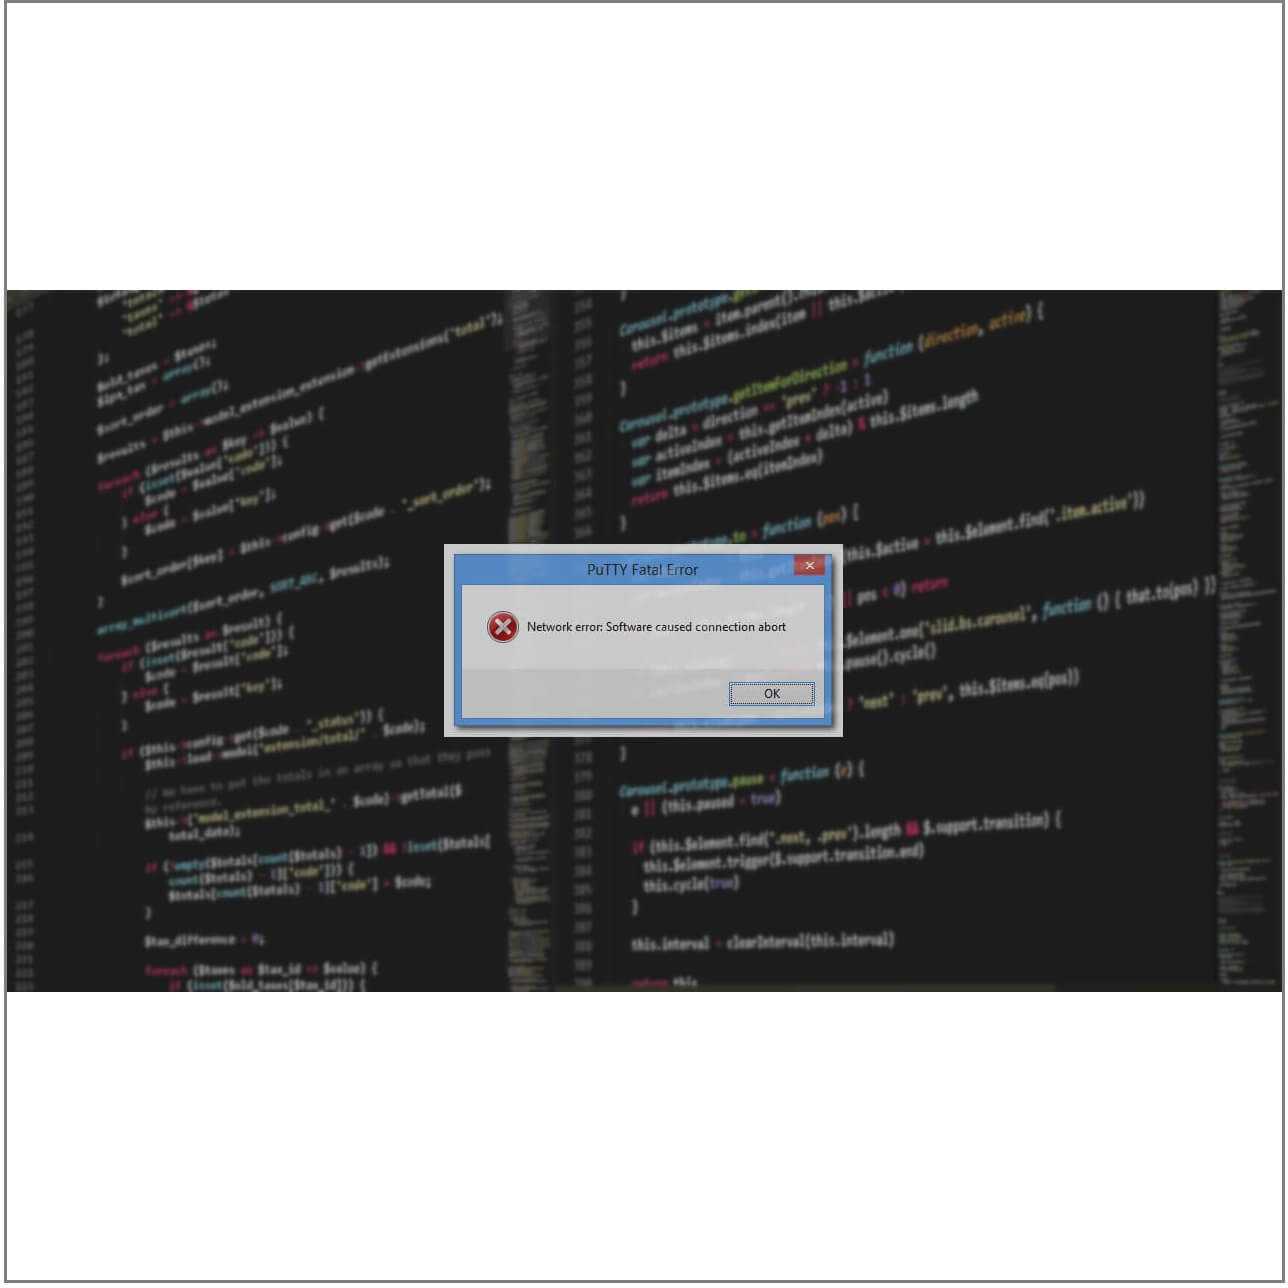 ошибка в кс fatal error failed to connect with local steam client process фото 67